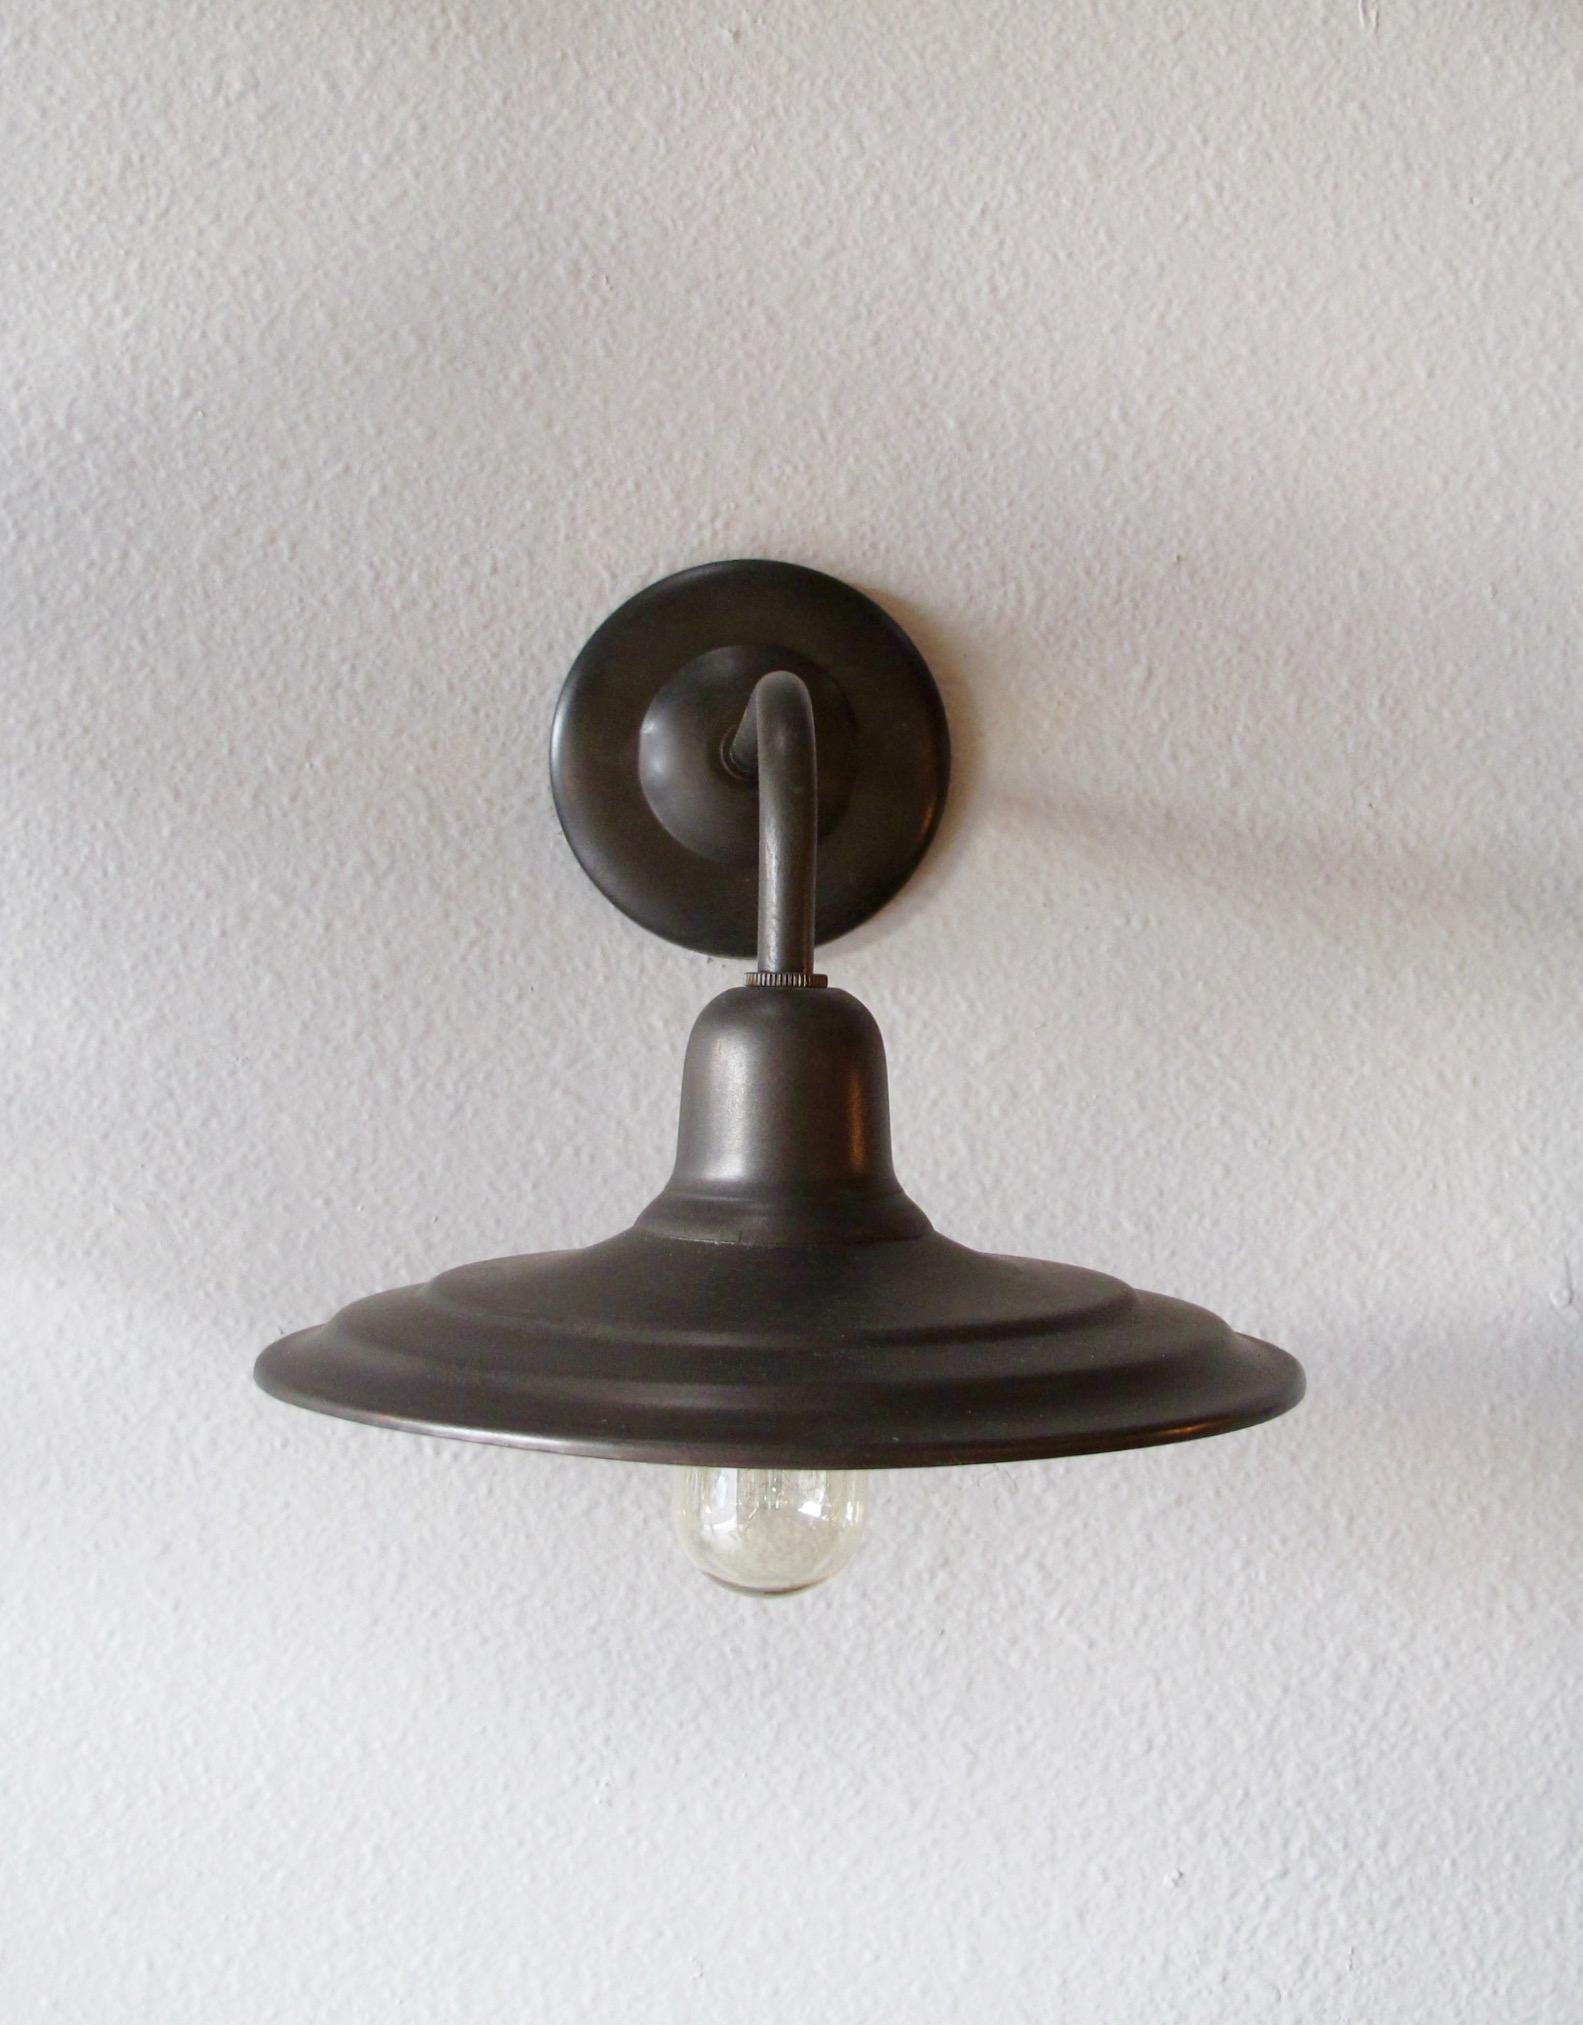 Part of the CHANDELIER Product Line, this is our Industrial Over Door Fixture. This fixture can be used for Interior or Exterior use and is UL Listed. One standard base bulb up to 60 watts. Light bulbs not included. Works nicely as an over mirror